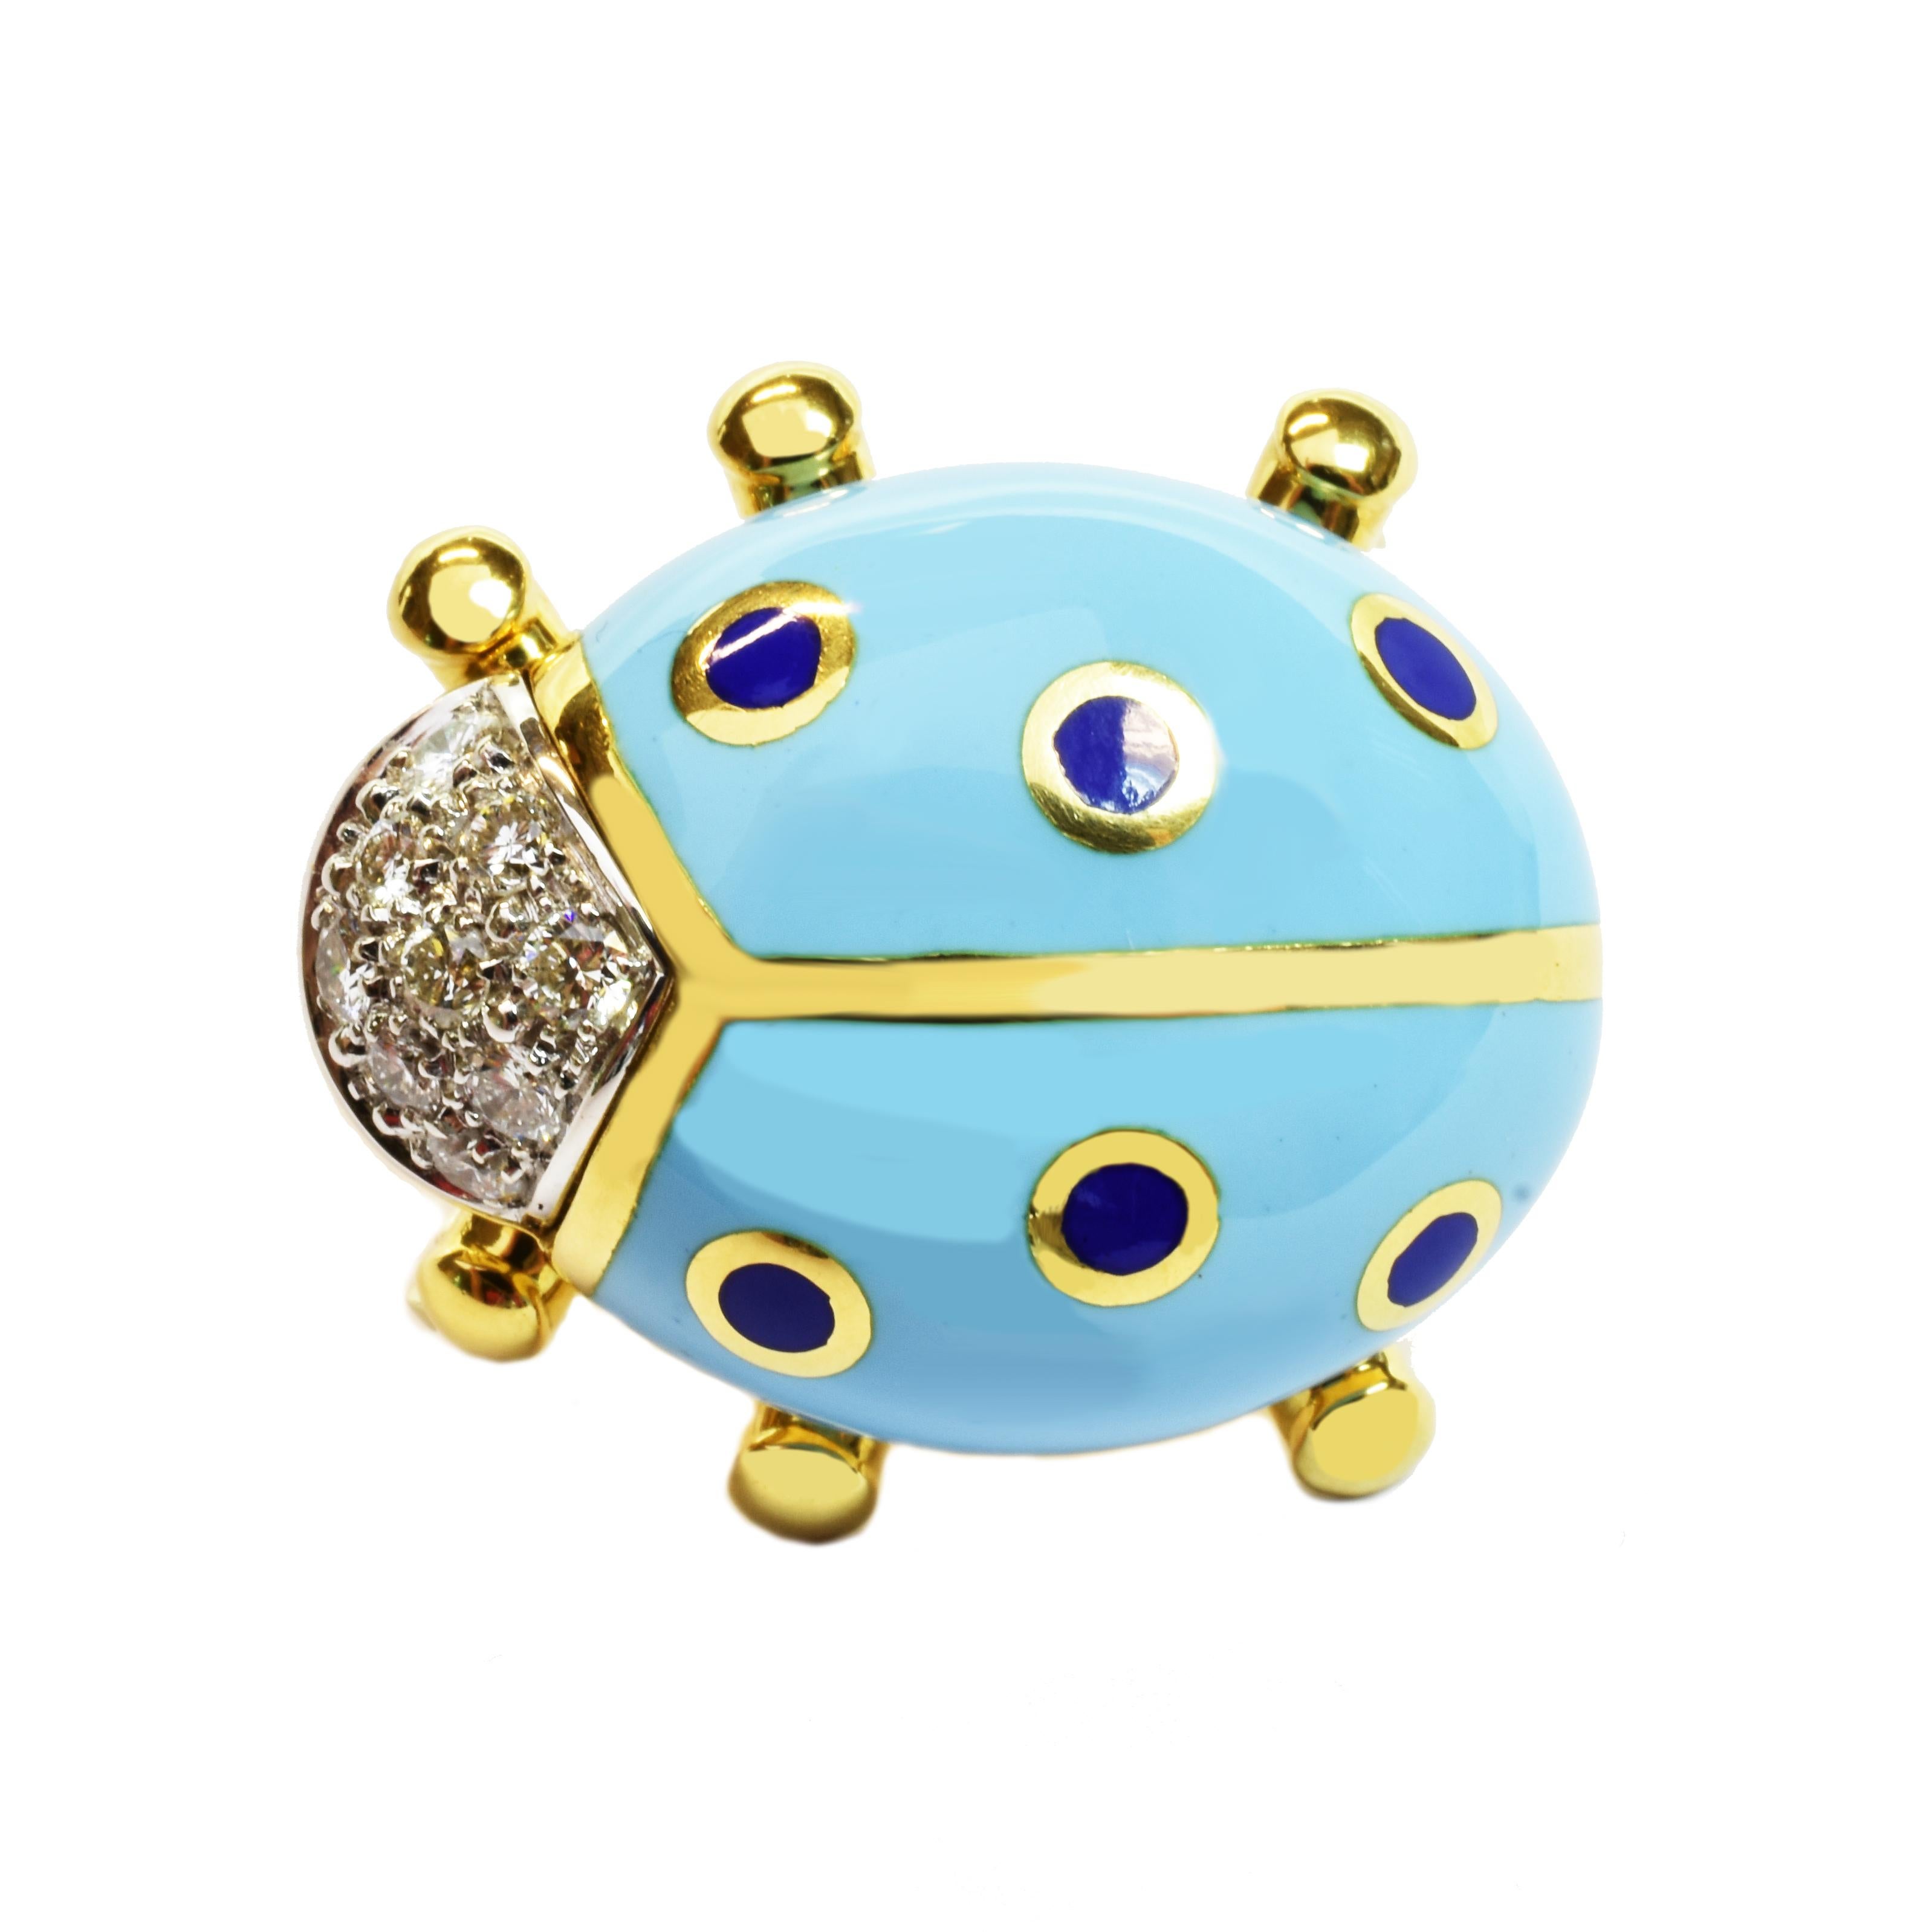 Gilberto Cassola 18Kt Gold Ladybug Brooch with White Diamonds and Baby Blue Enamel Body with Blue Dots.
Handmade in our Atelier in Valenza Italy. 
The Piece is Mainly in 18Kt Yellow Gold. The Head is in 18Kt White Gold.
